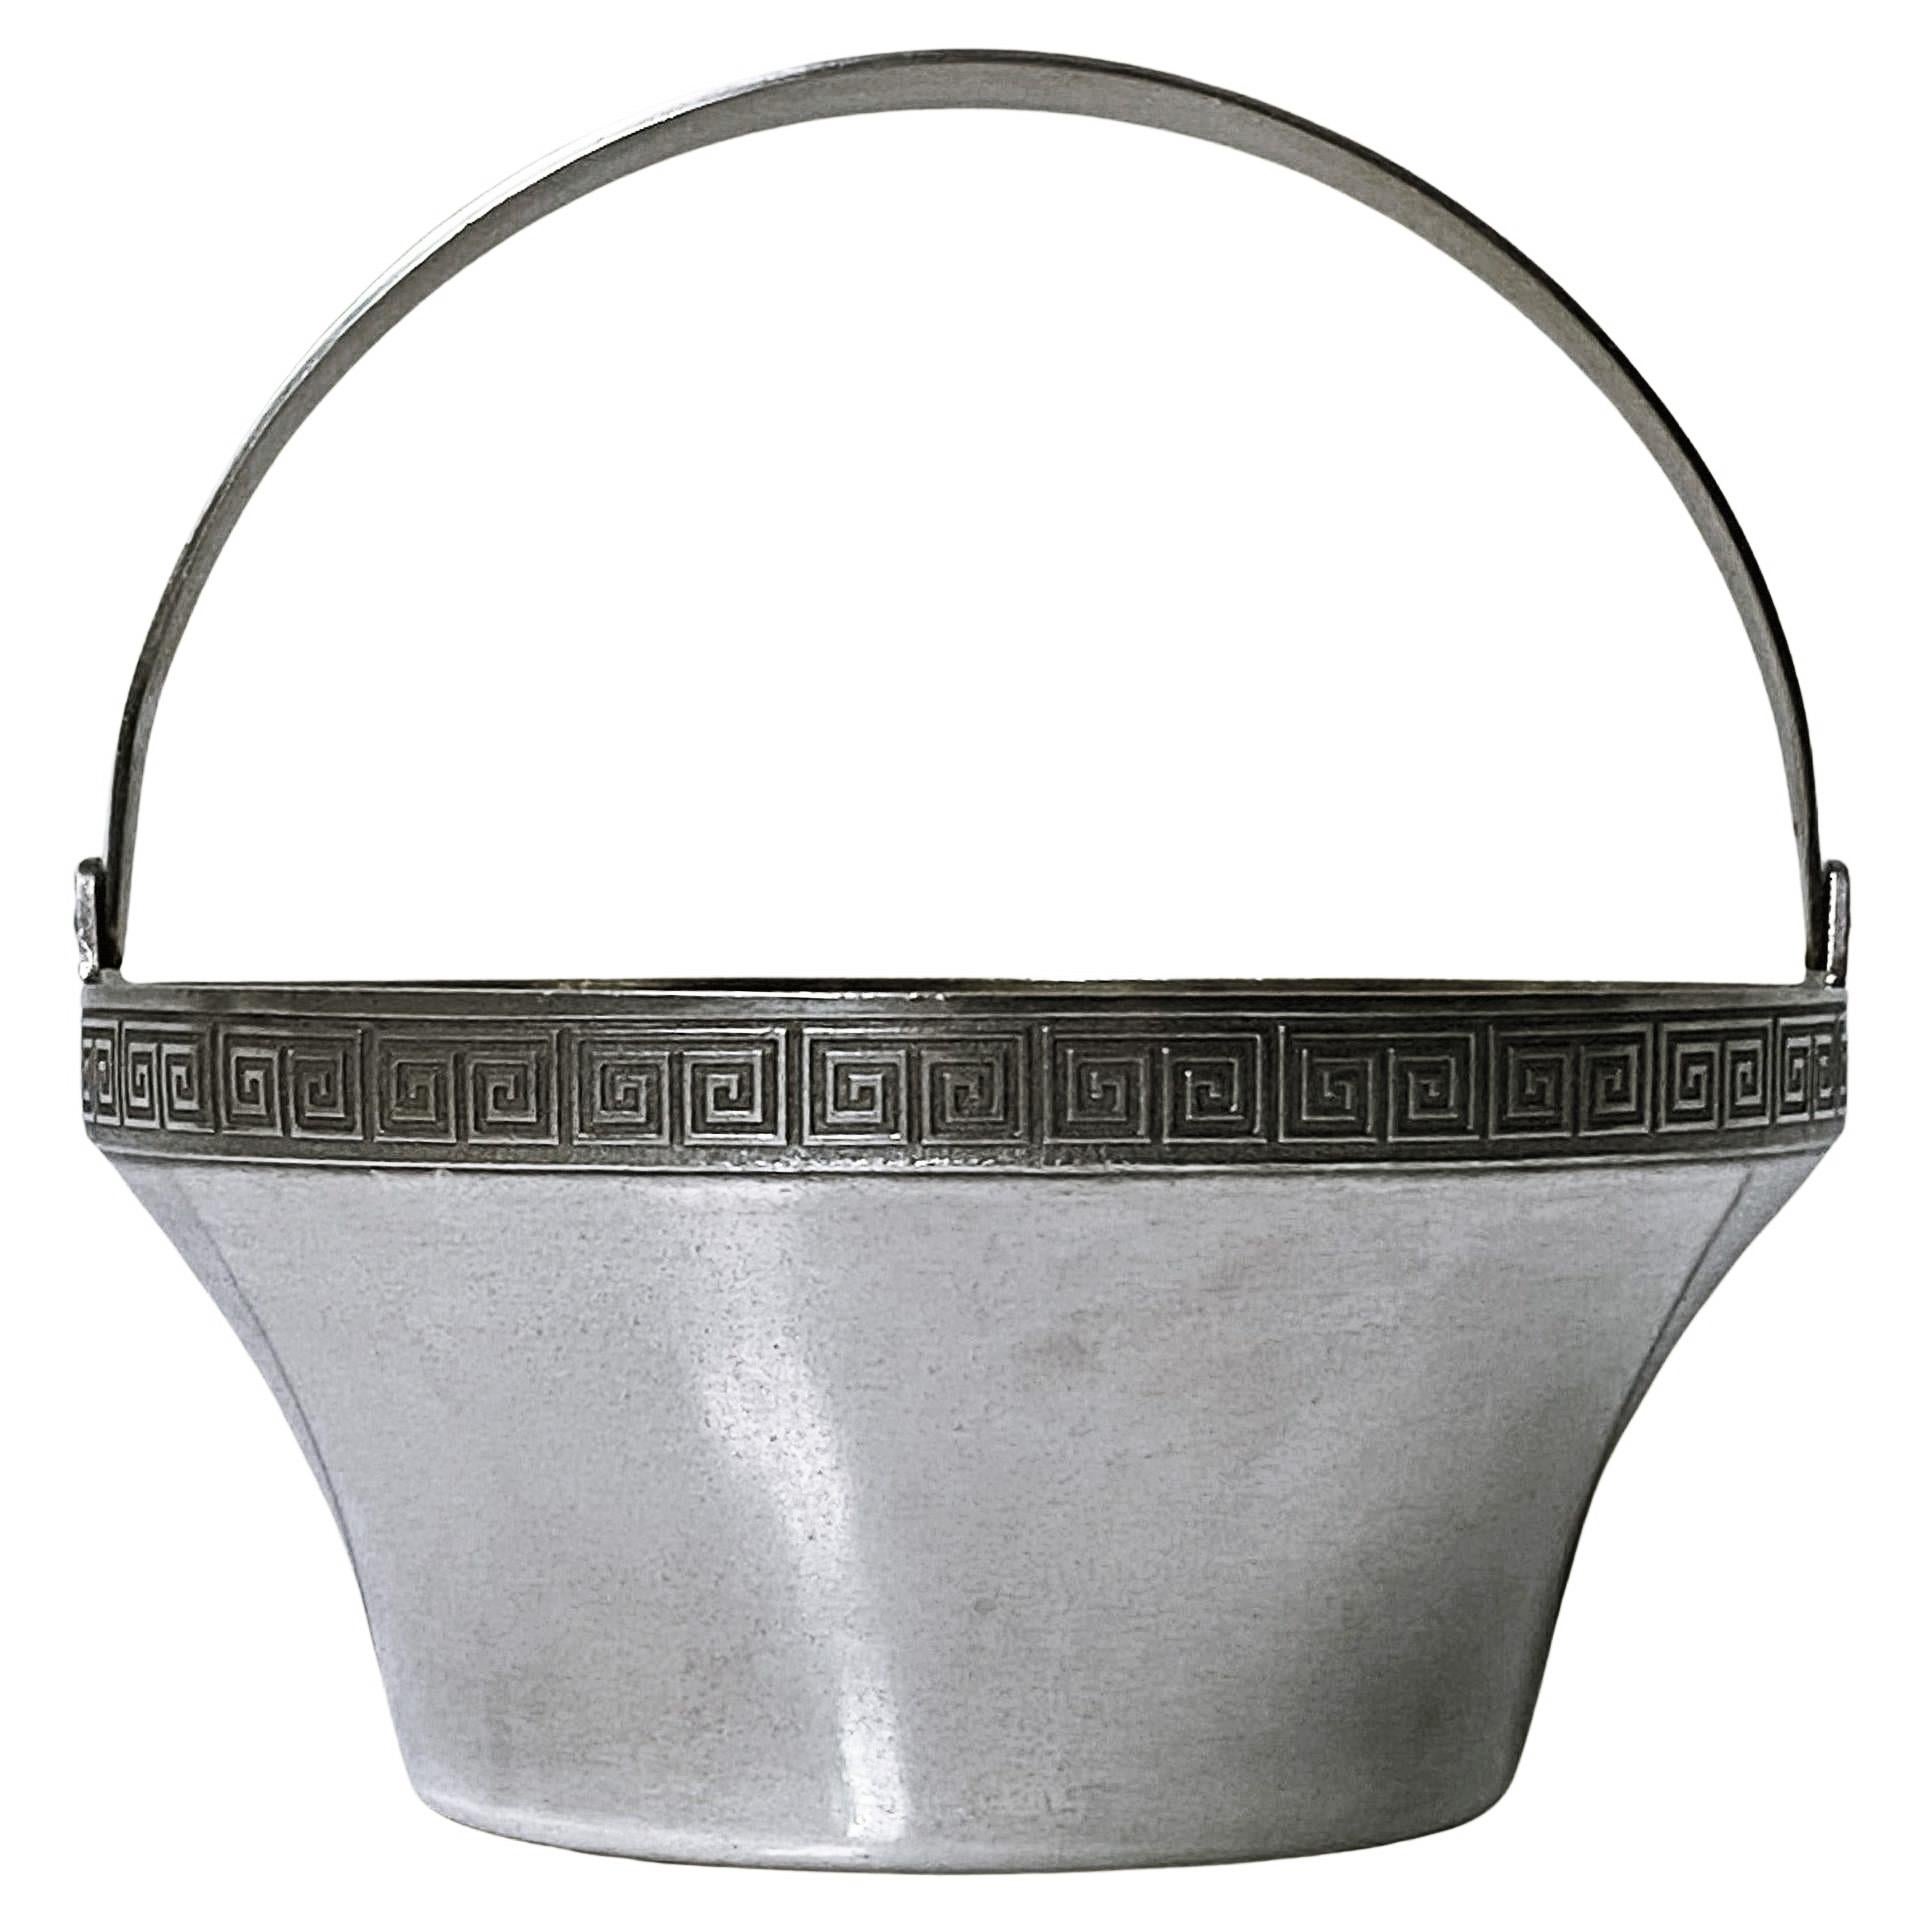 Russian silver basket circa 1940. Hammer & Sickle Mark 0.916 purity. Swing handle basket with Greek key design border, gilded interior. Height (handle up 4.25 inches, 2 inches excluding handle). Diameter: 4.25 inches. Weight: 191 grams. Condition: